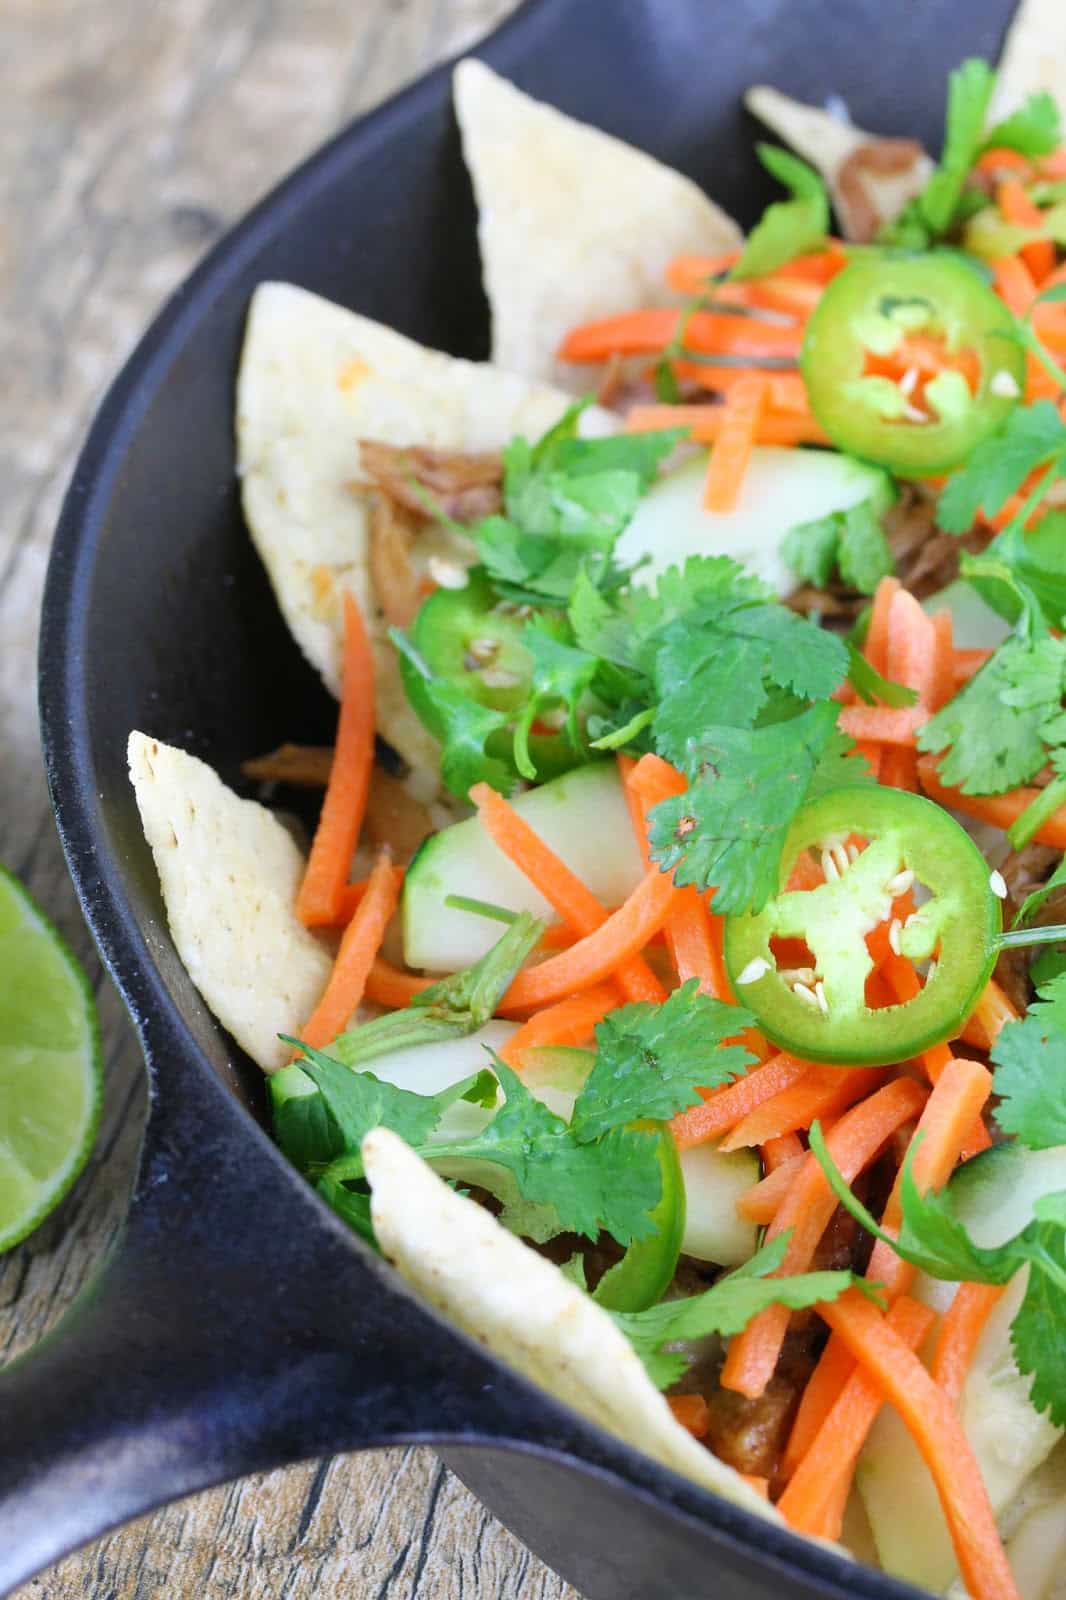 Bahn mi nachos in a skillet with slow cooker pork, carrots, cucumber, jalapeno and garnished with cilantro